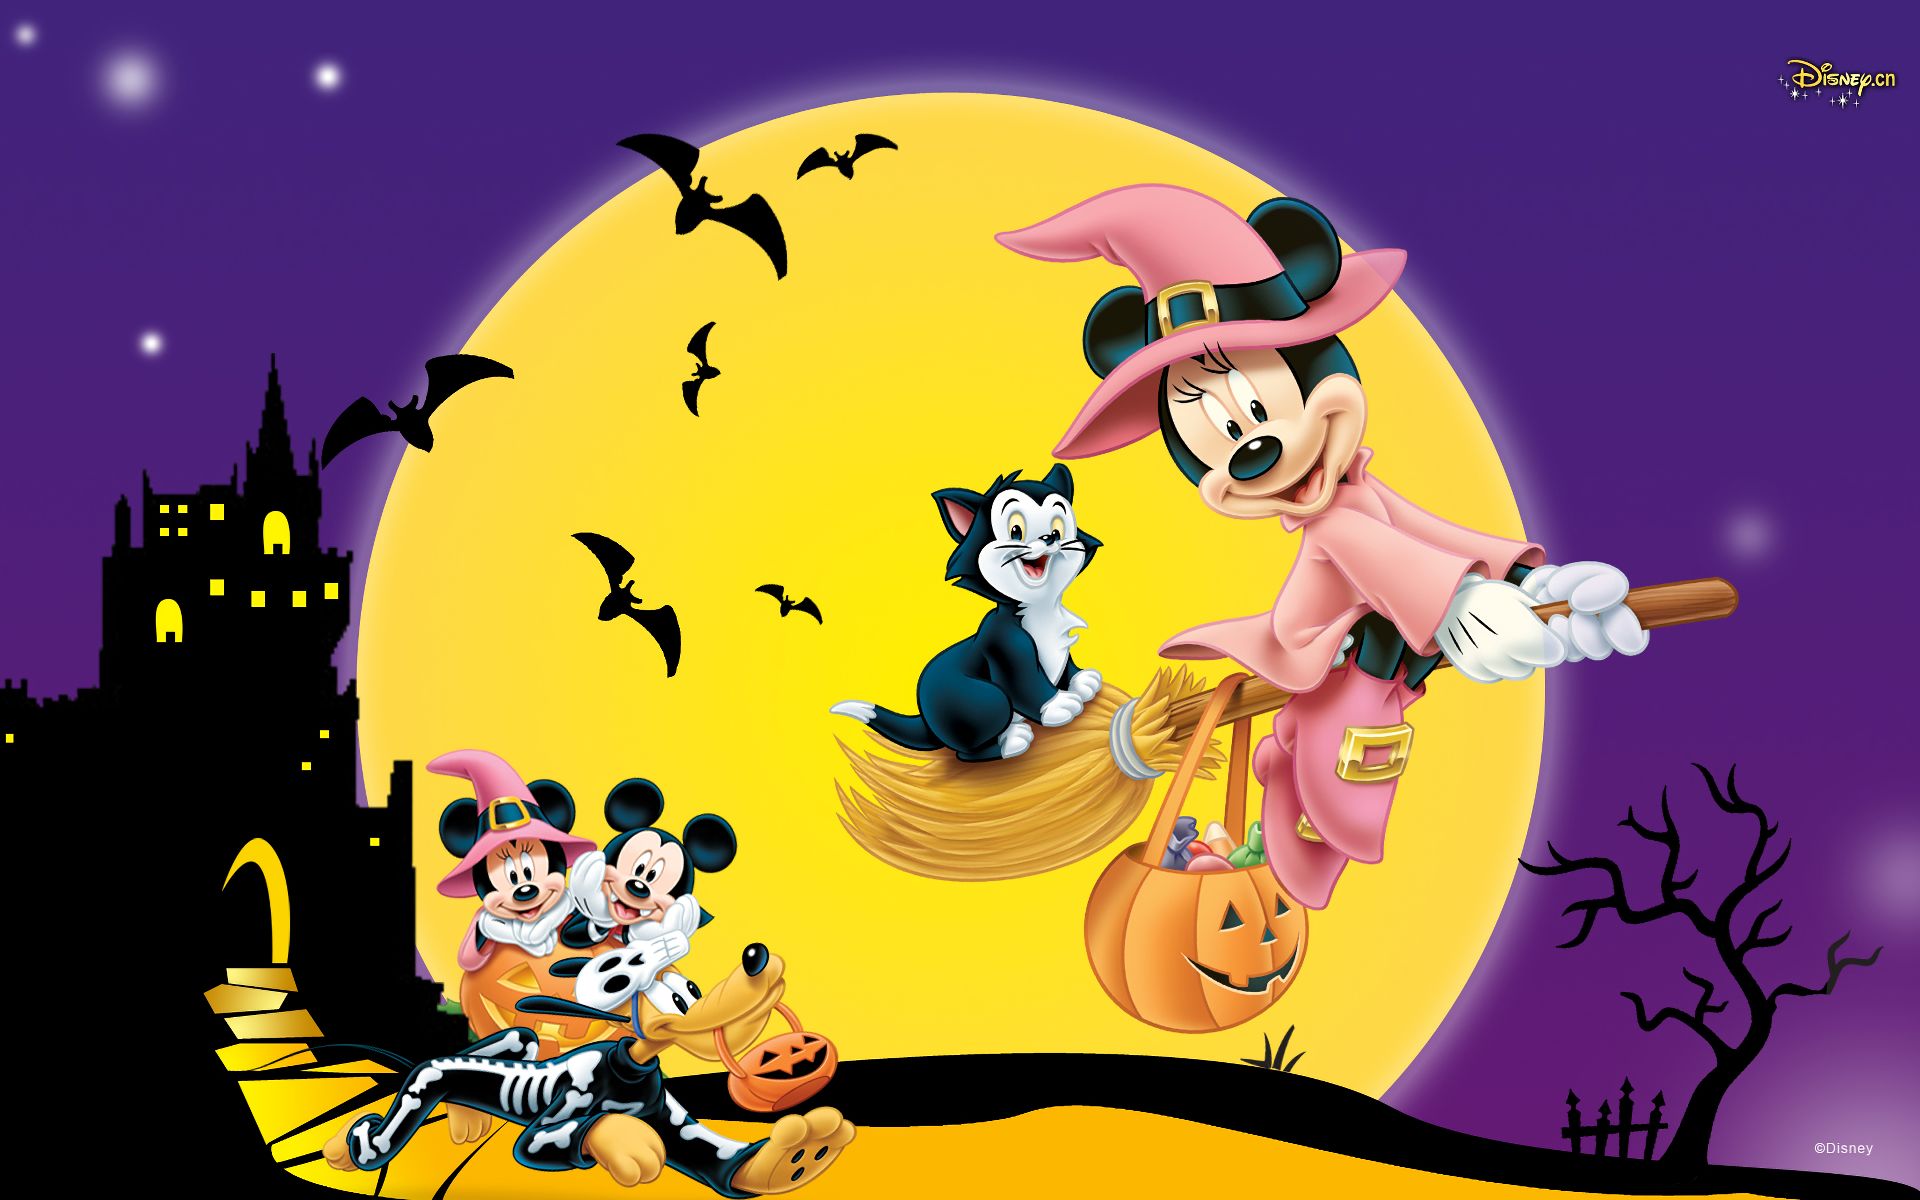 Full HD Wallpaper mickey mouse, minnie mouse, movie, disney, cat, halloween, pluto